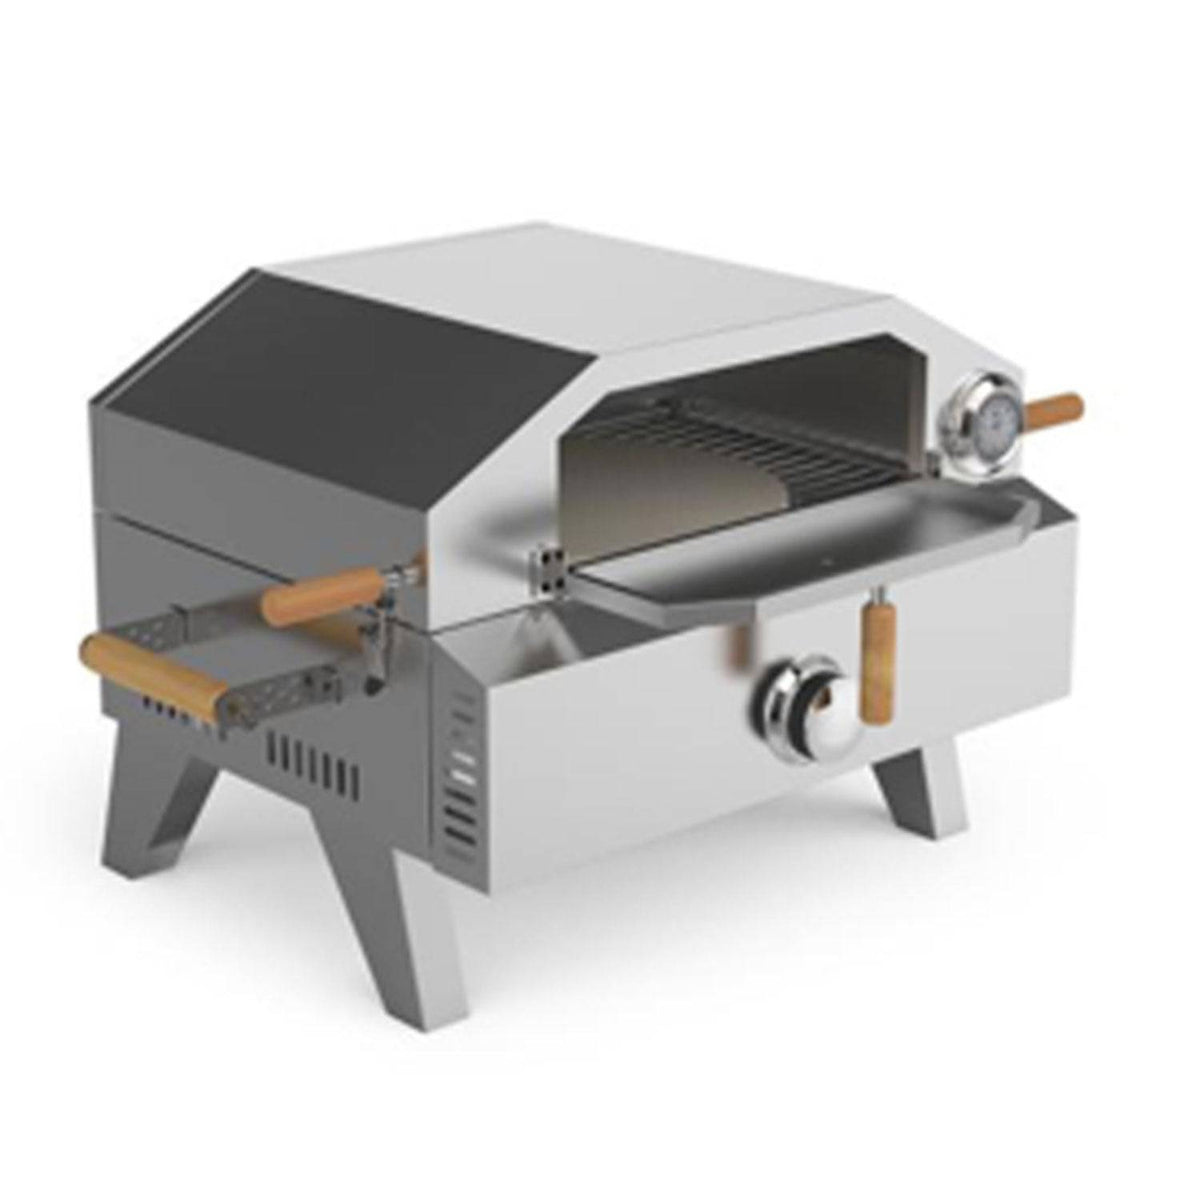 Fobest Outdoor Portable Stainless Steel Gas Pizza Oven & Grill